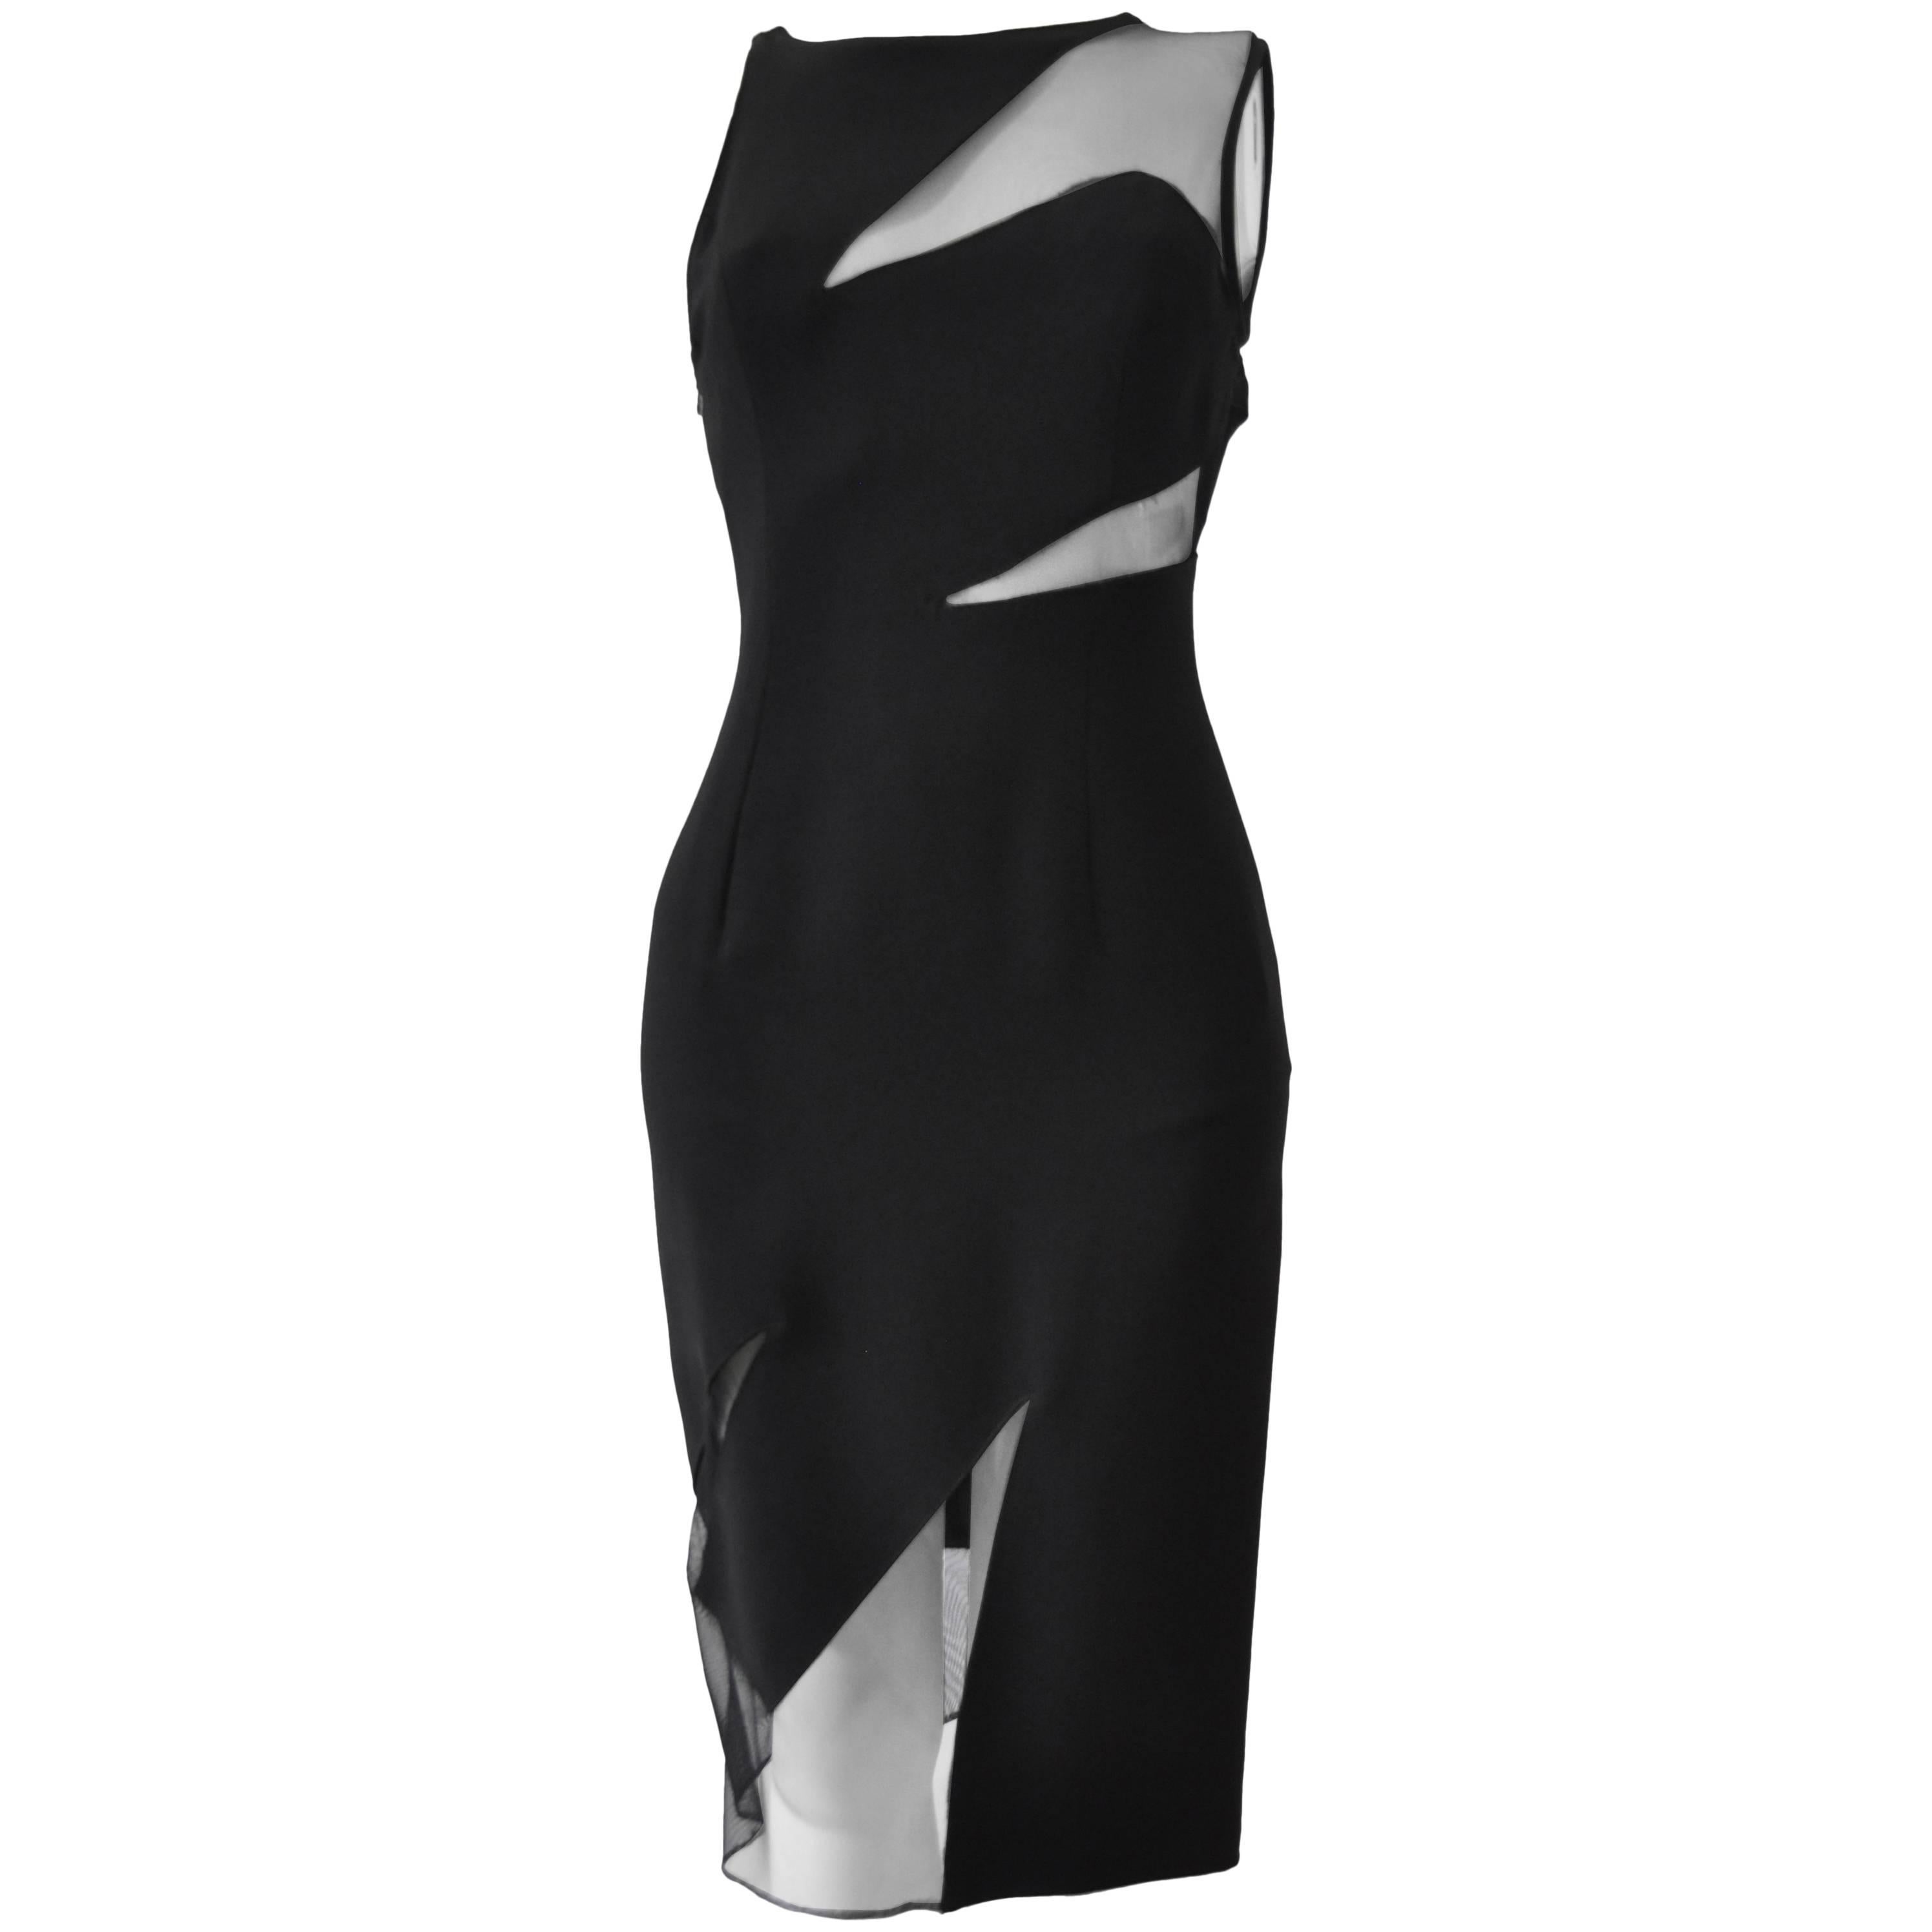 Daring Angelo Mozzillo Cut-Out Sheer Black Bodycon Dress For Sale